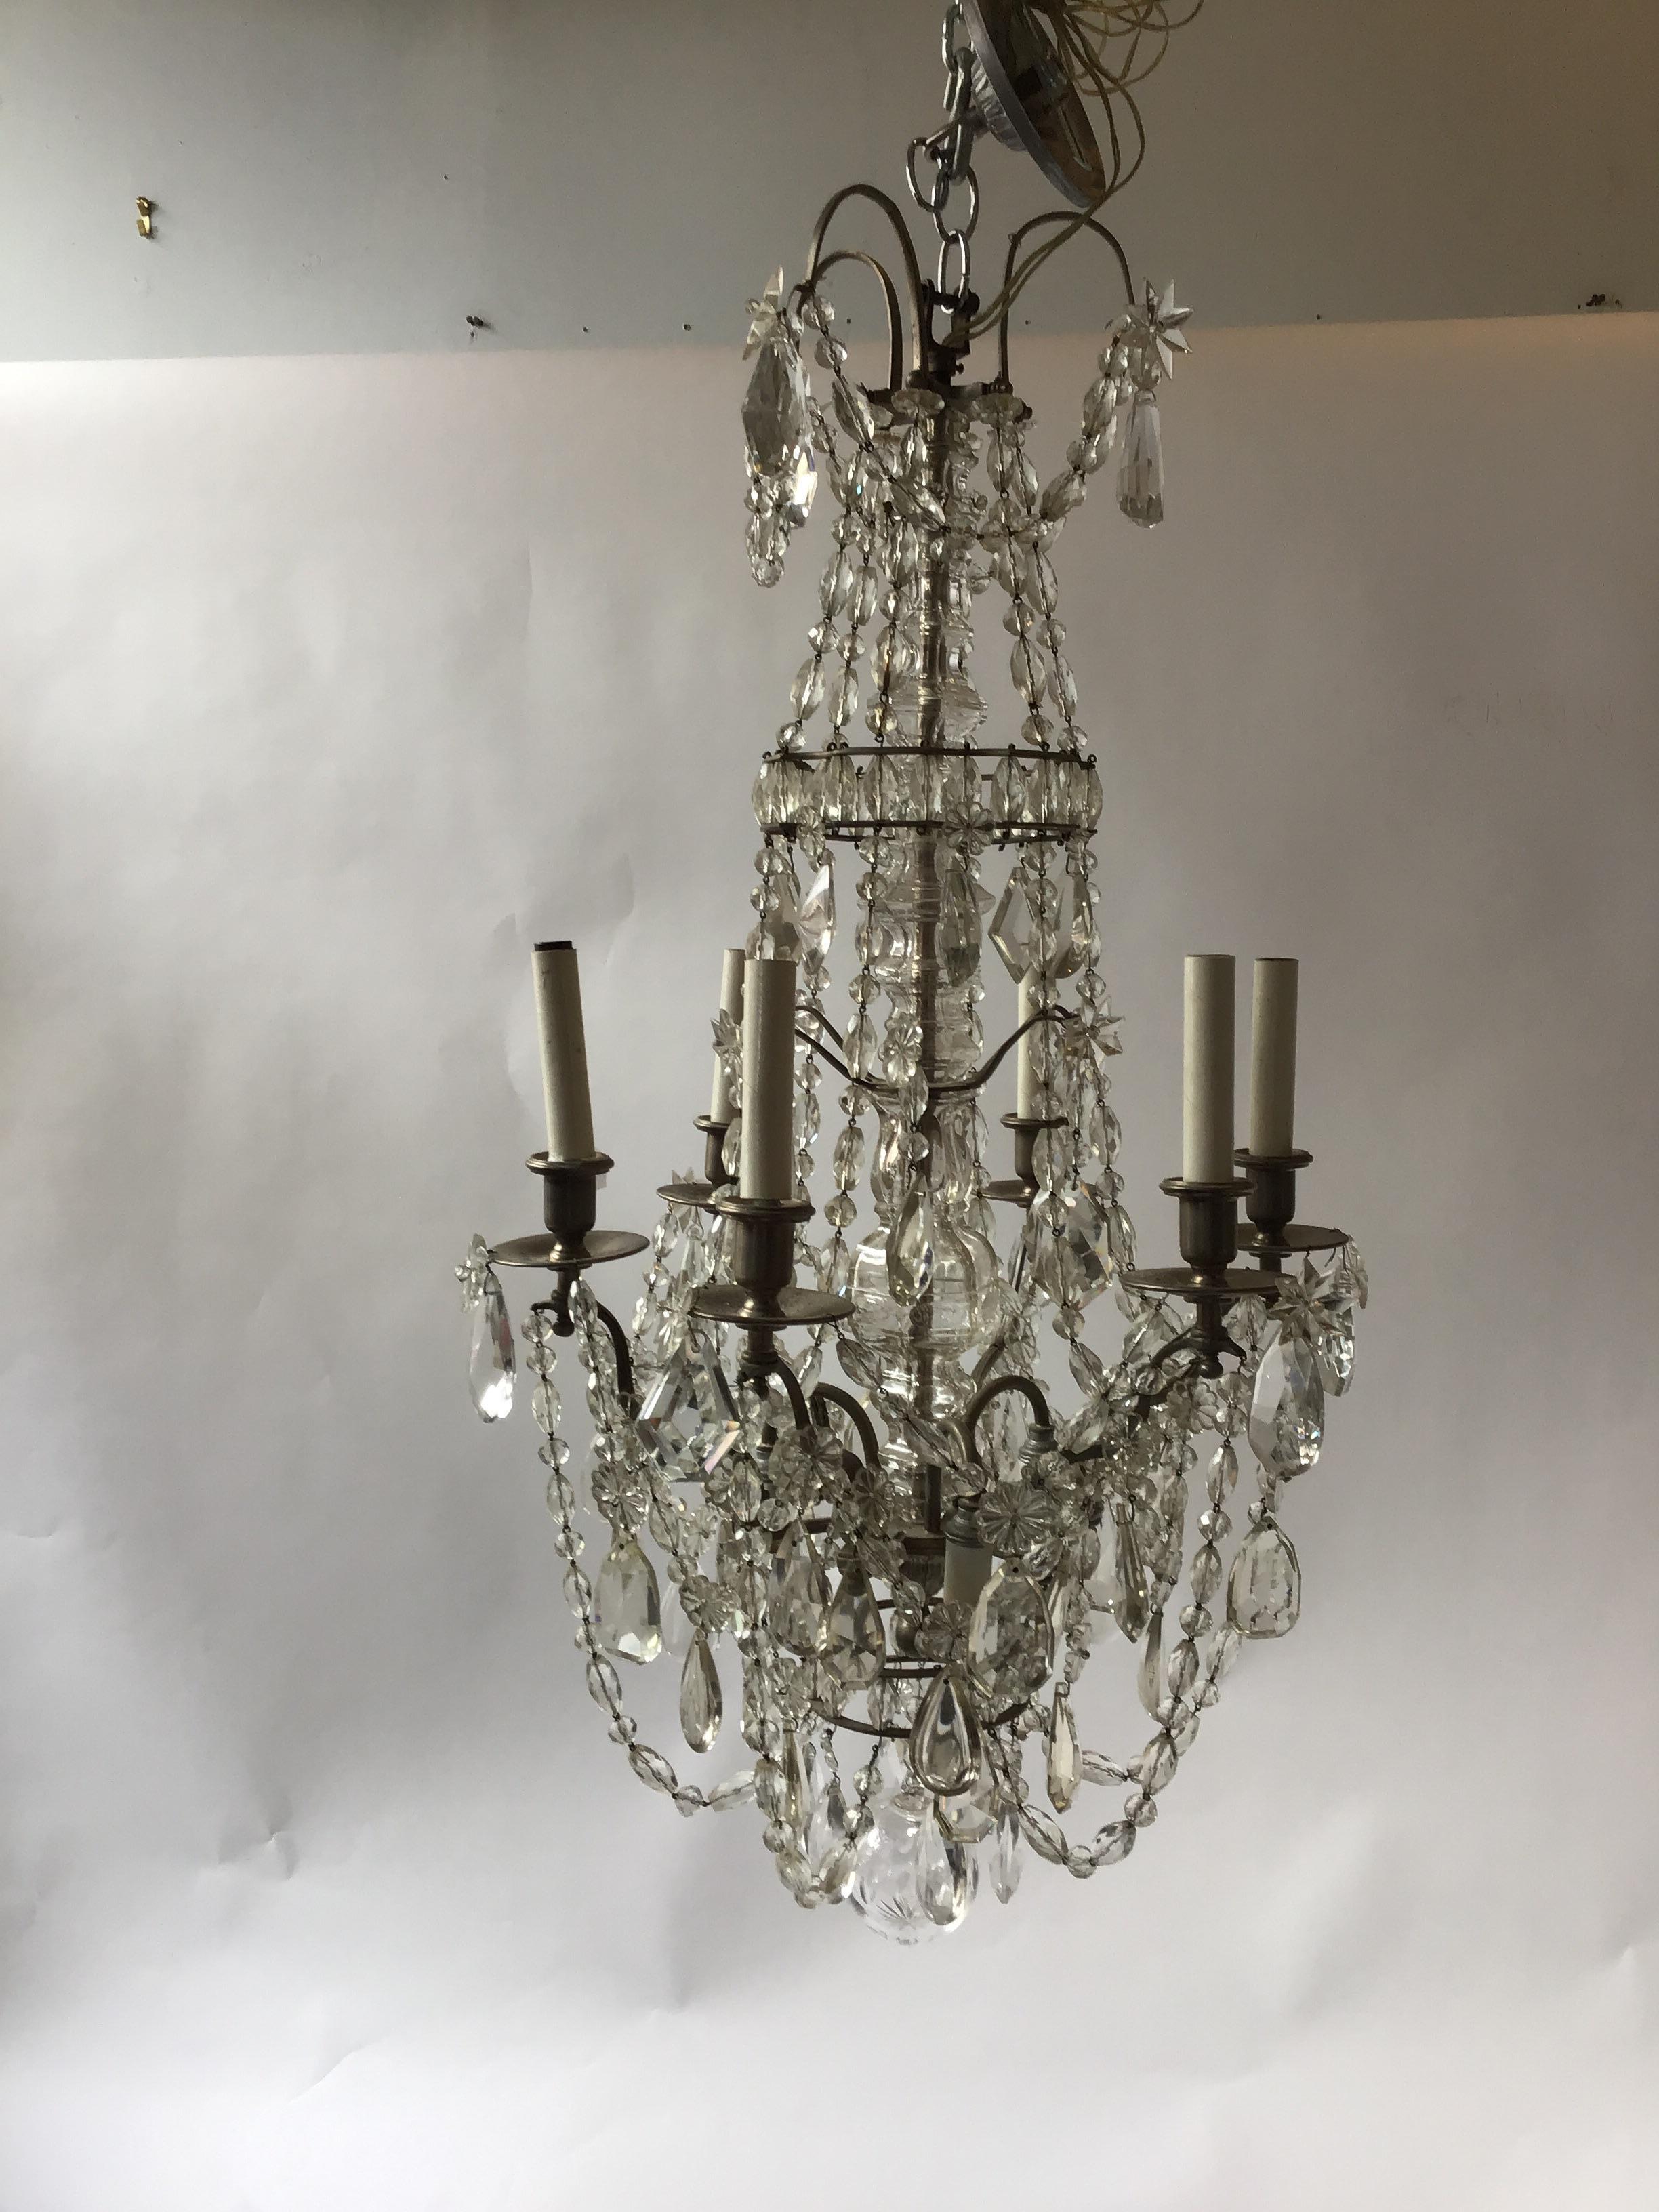 1940s French crystal 6-arm chandelier from a Park Avenue apartment. Very elegant.